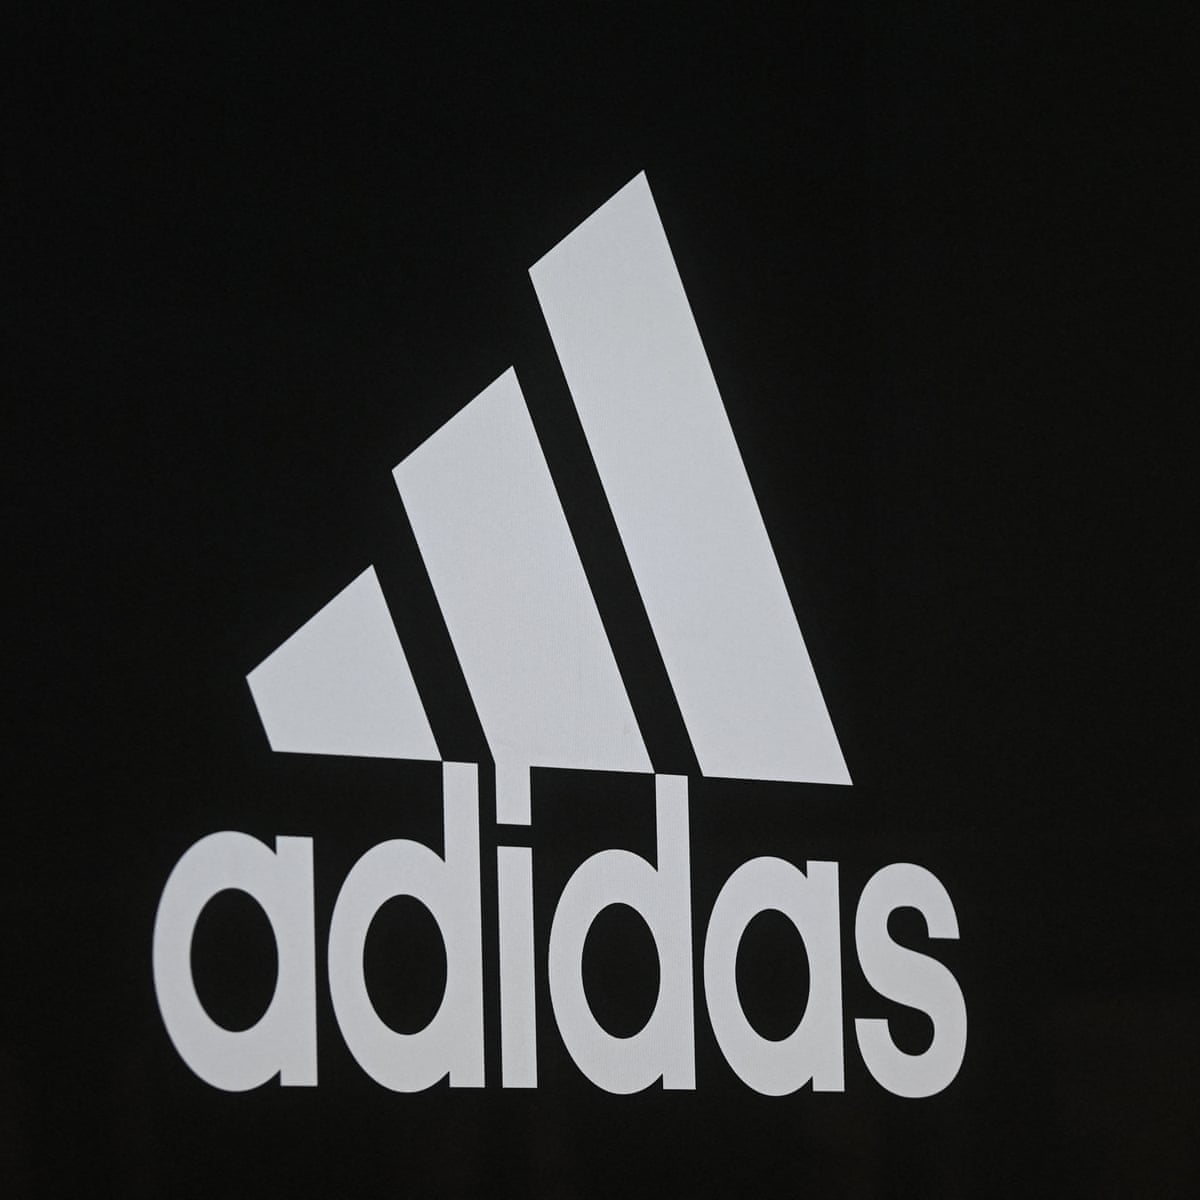 Adidas sports bra ads banned for being likely to cause widespread